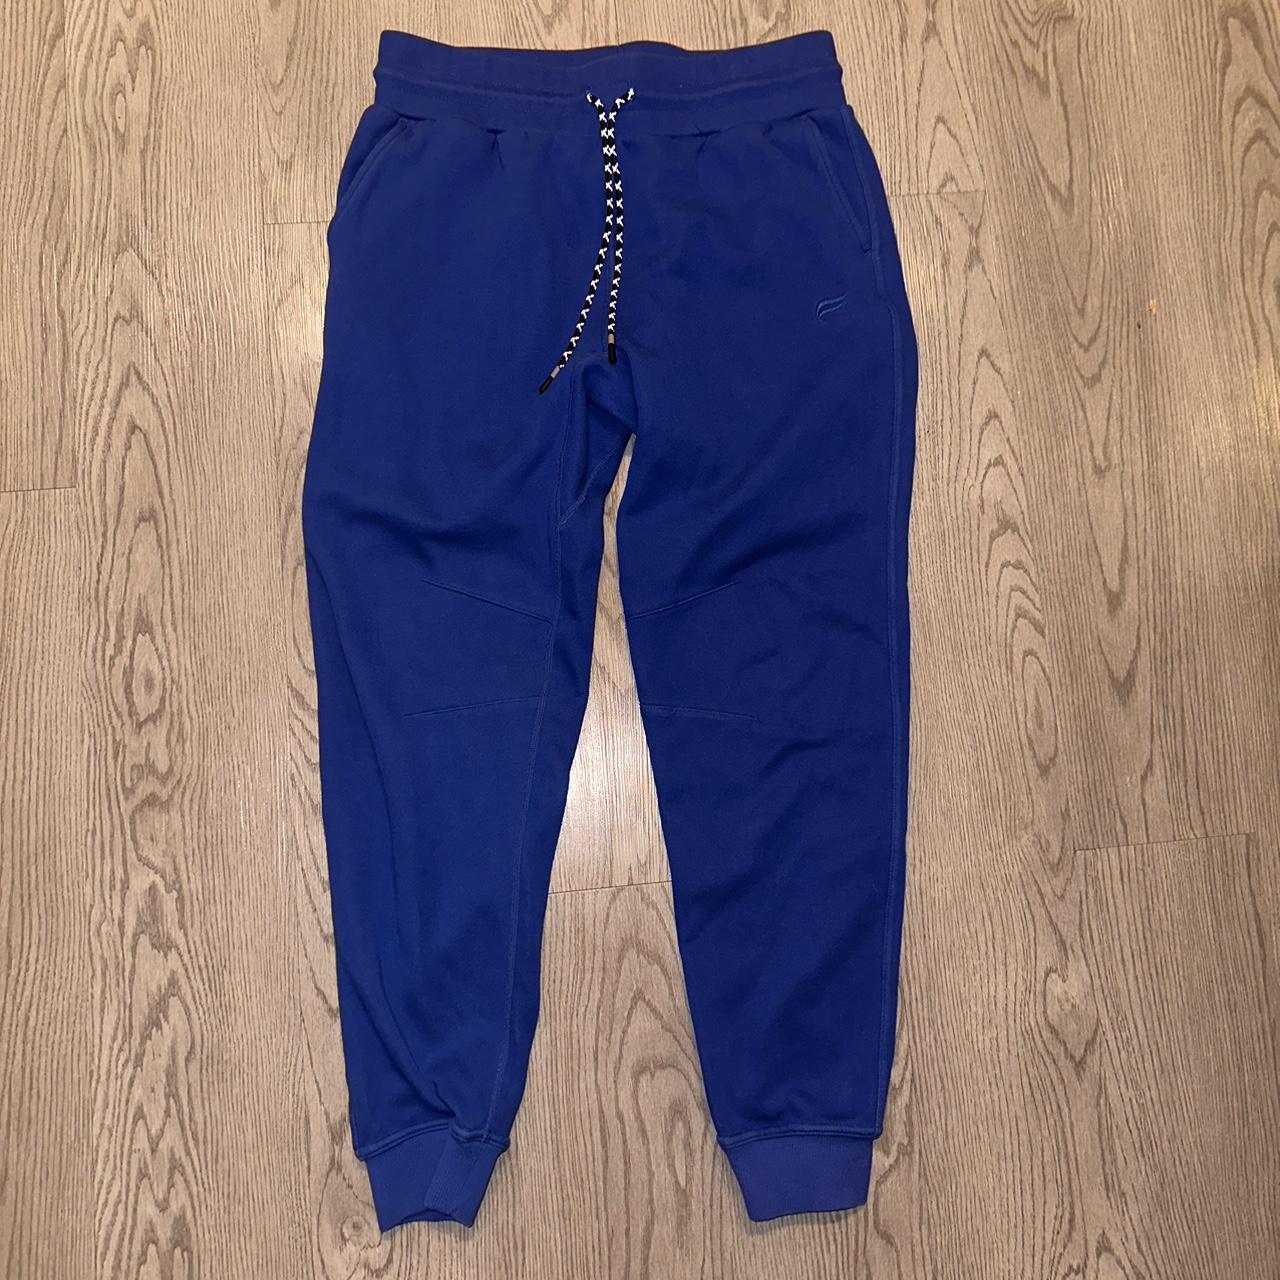 Blue Fabletics Joggers No rips or stains - Depop